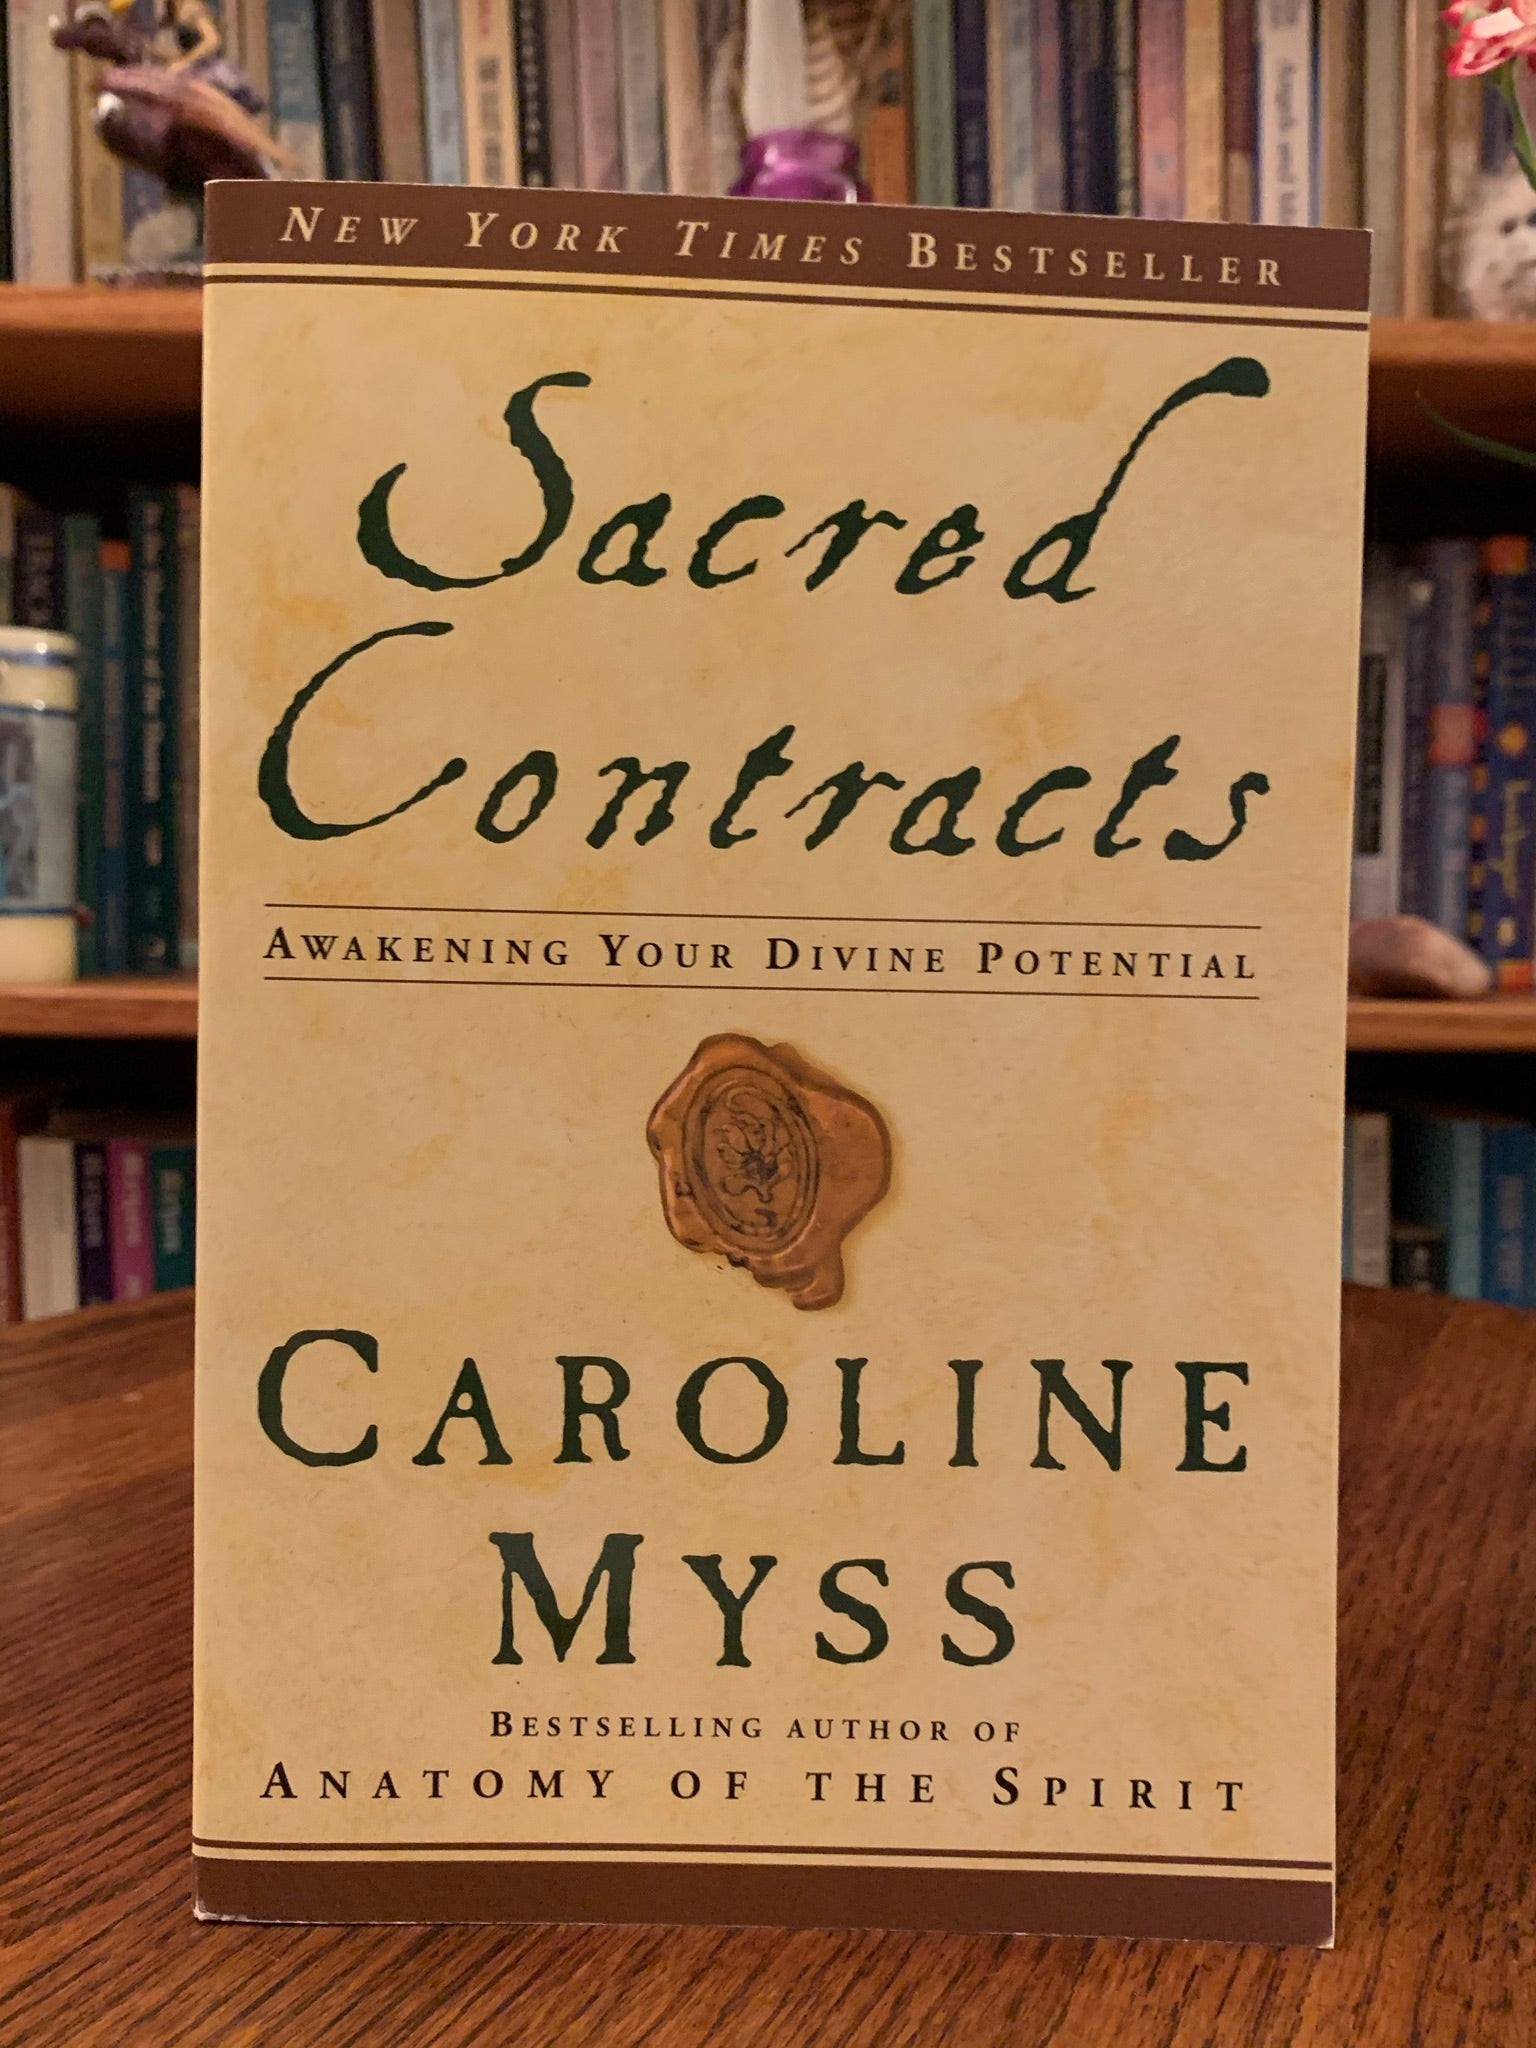 Front cover. Sacred Contracts by Caroline Myss is a powerful book and guide to finding your own sacred contracts (higher purpose) using archetypes that "build on the works of Jung, Plato" and others. In coming to know your archetypal companions, you also begin to see how to live your life in ways that make the best use of your personal power and lead you to fulfill your greatest - in fact, your divine - potential." Myss is a best-selling author, medical intuitive and spiritual teacher. Cost is $17.99